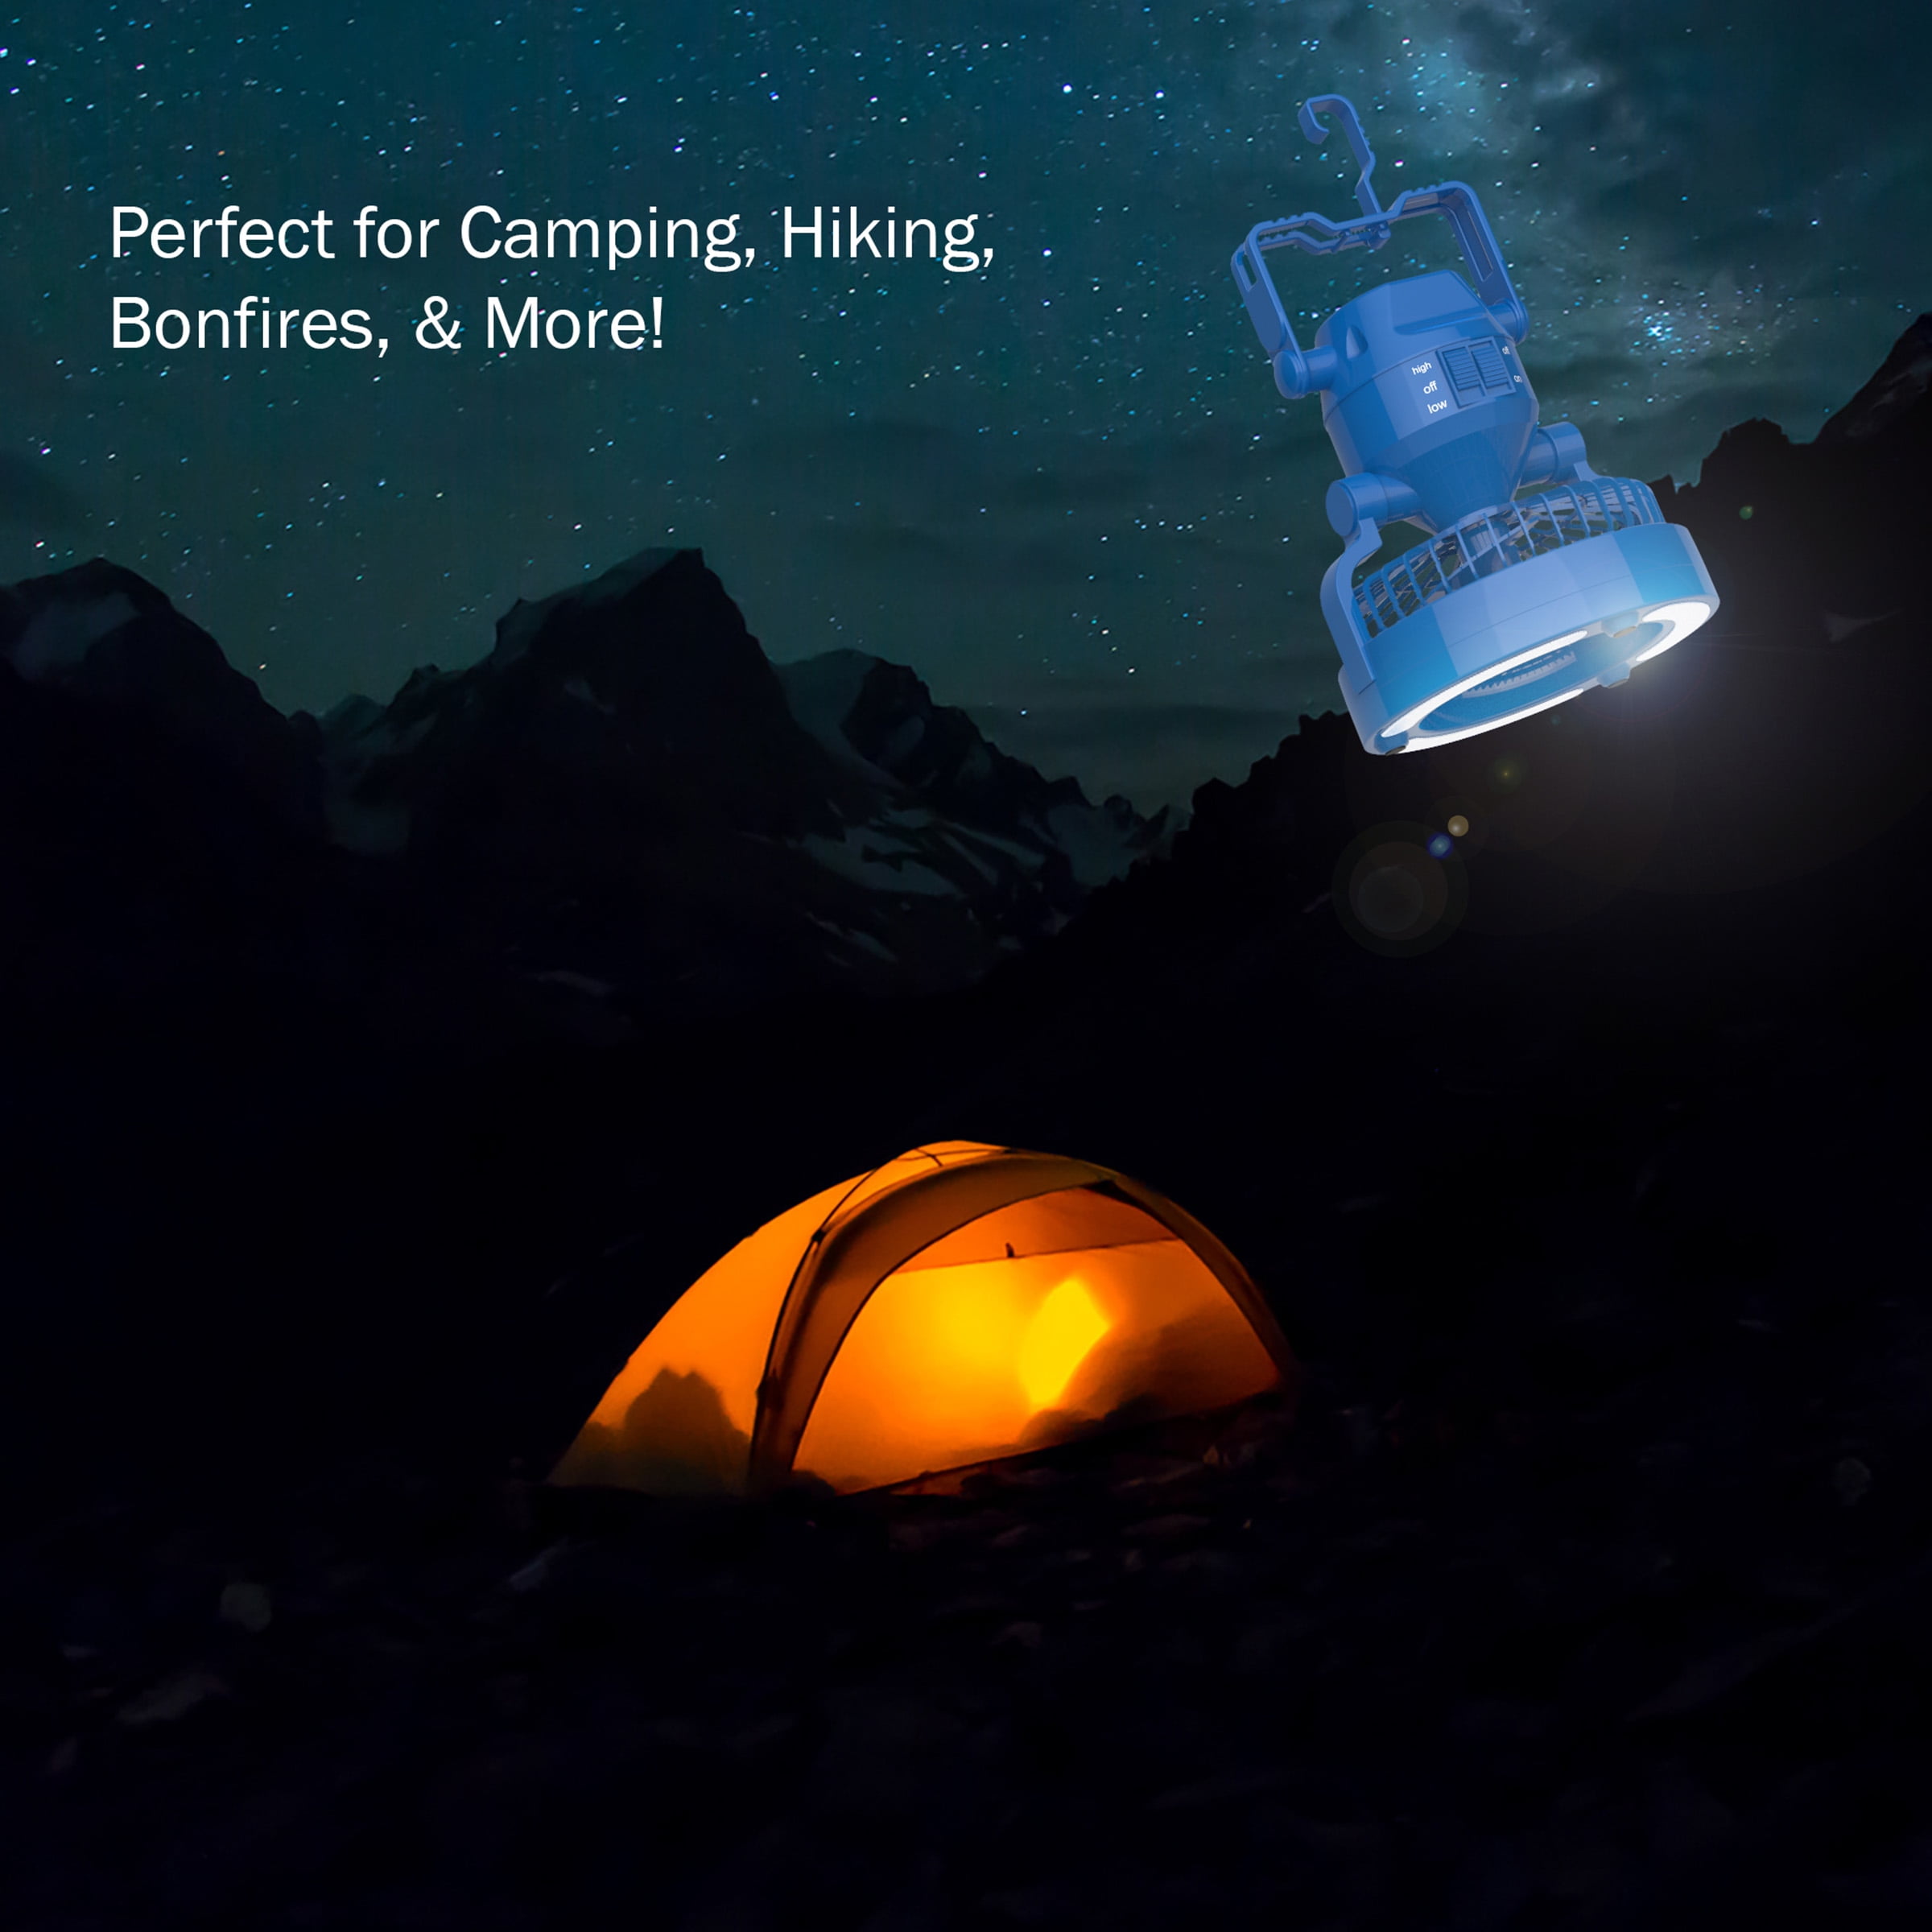 Led Camping Lantern With Ceiling Fan